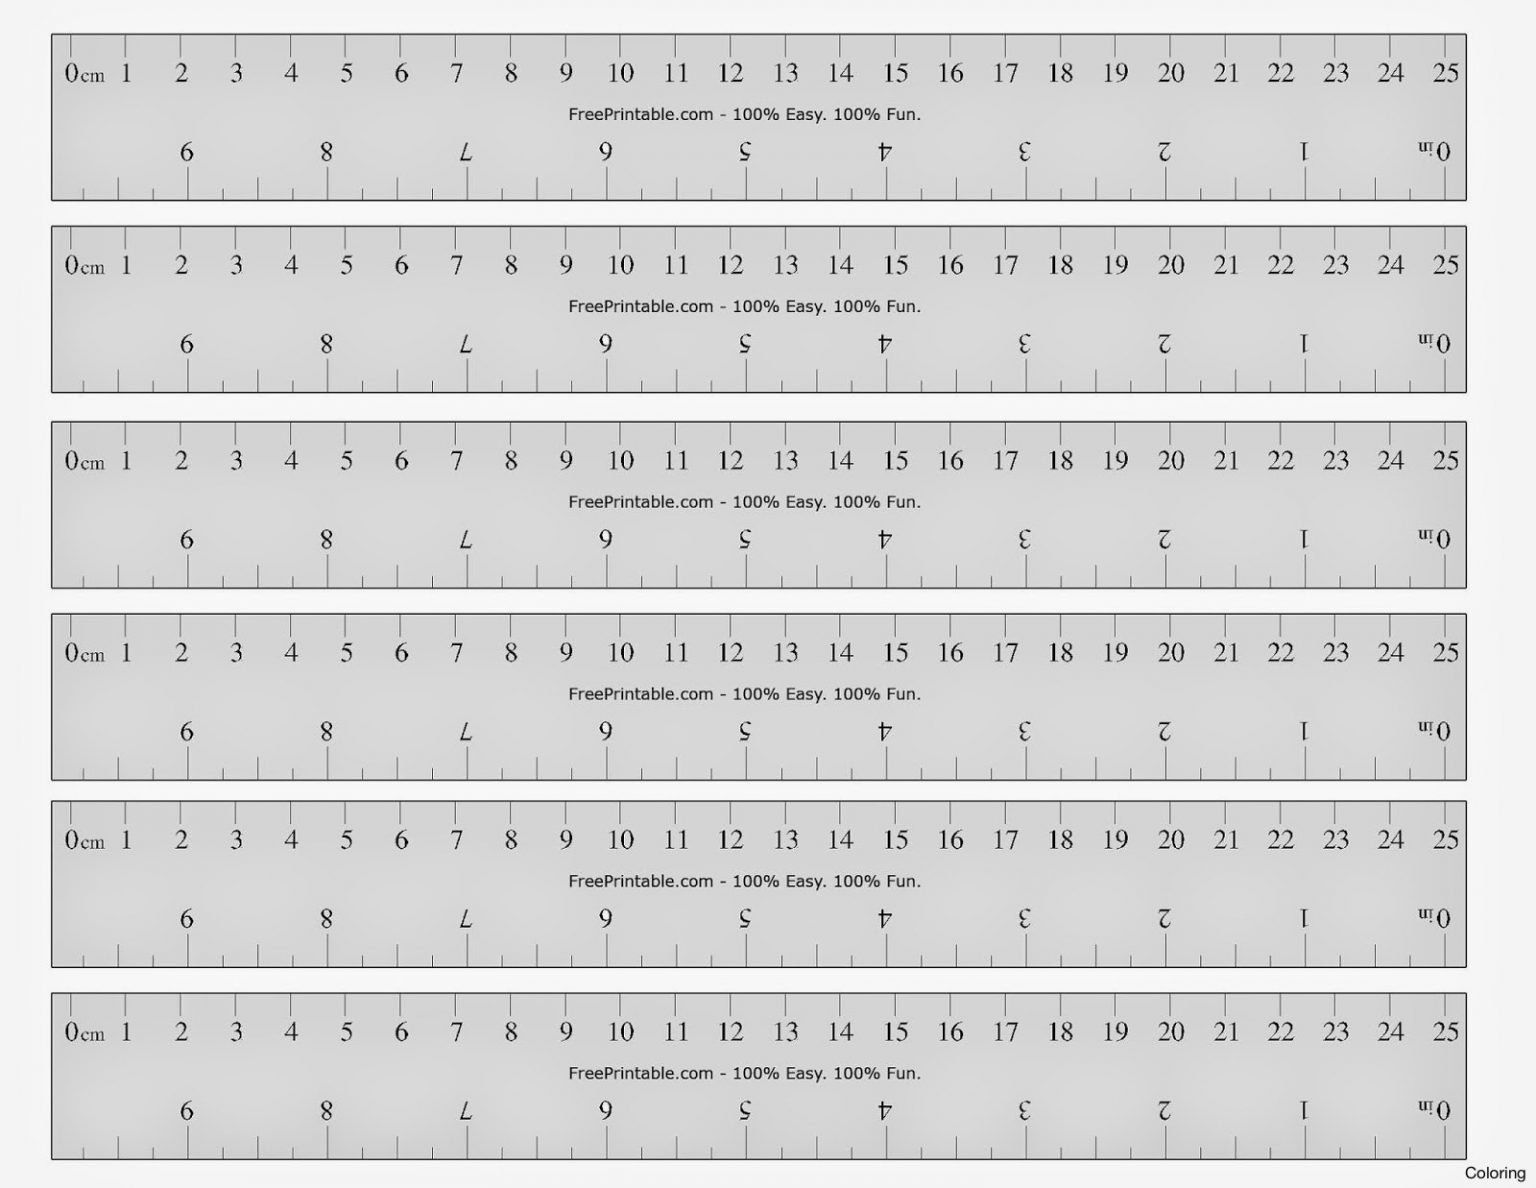 free printable ruler inches and centimeters